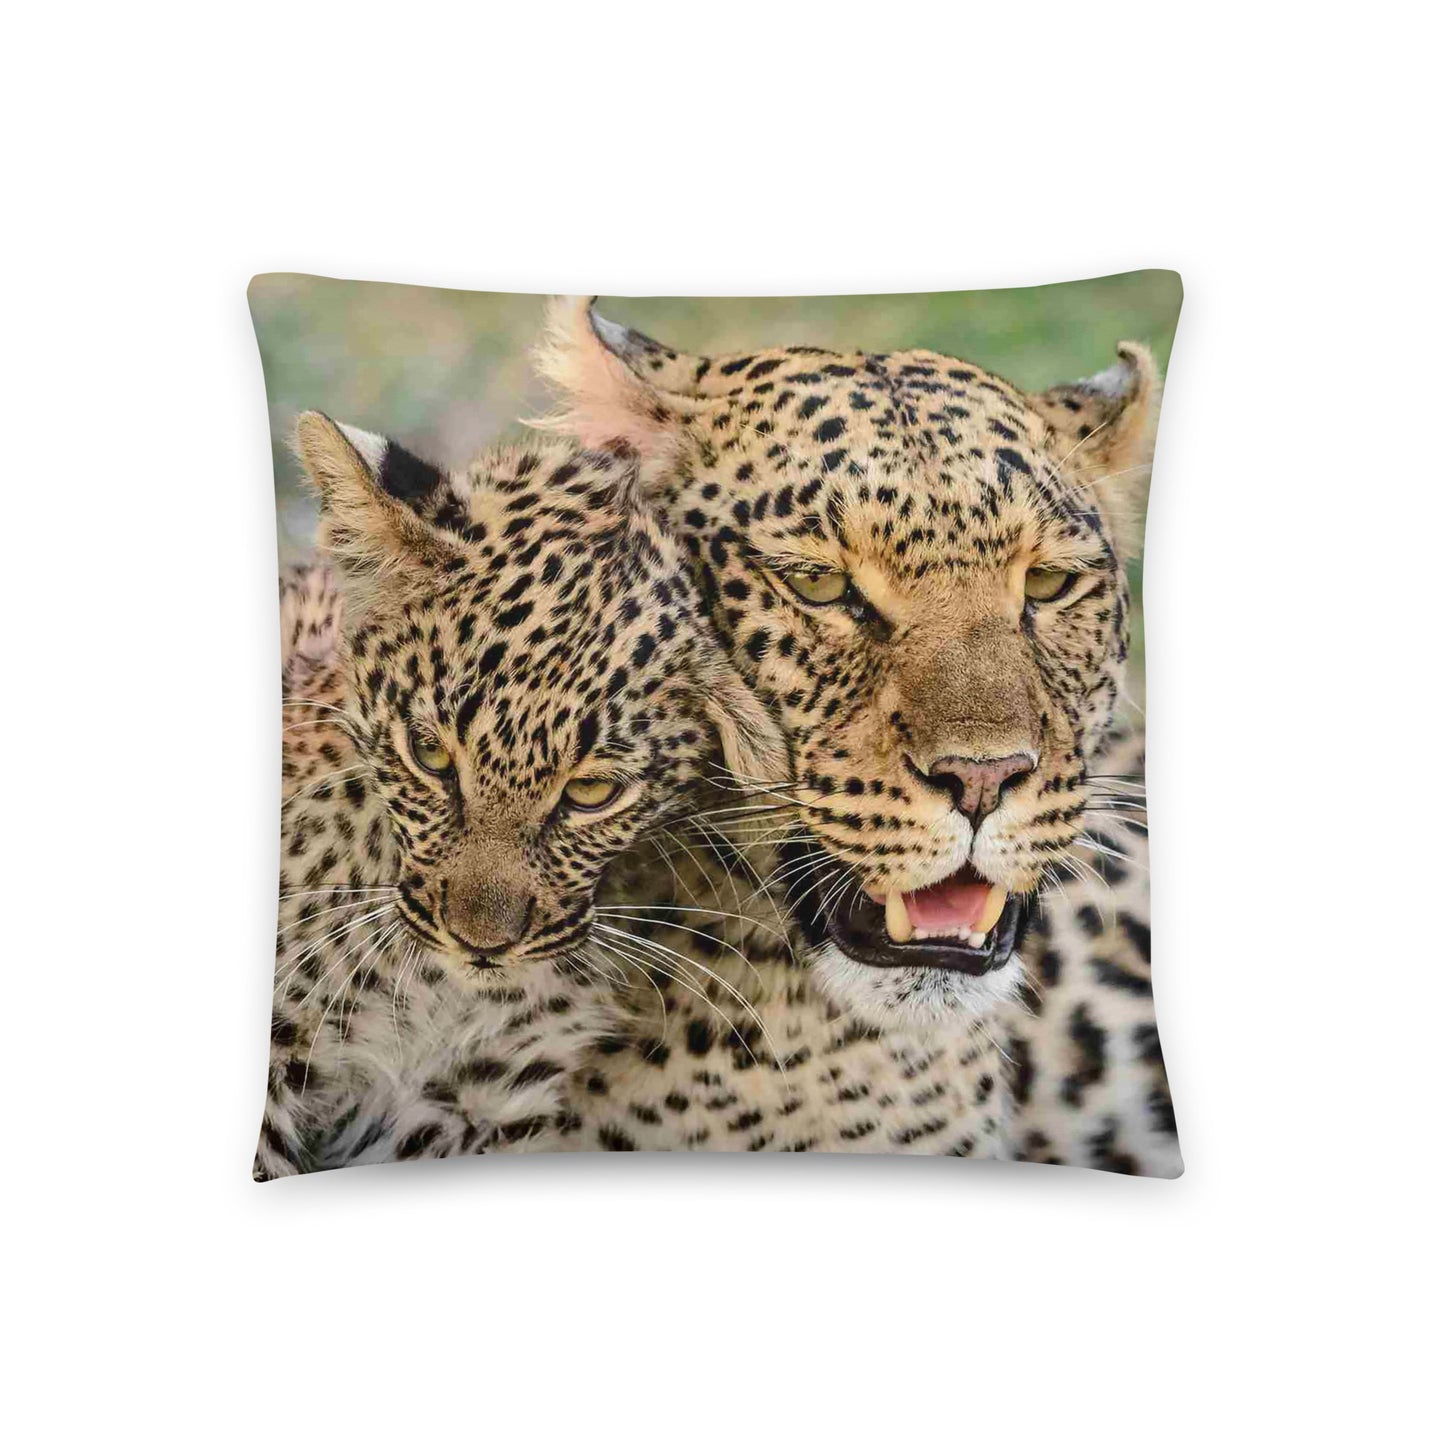 Throw Pillow with a Print of a leopard and Cub